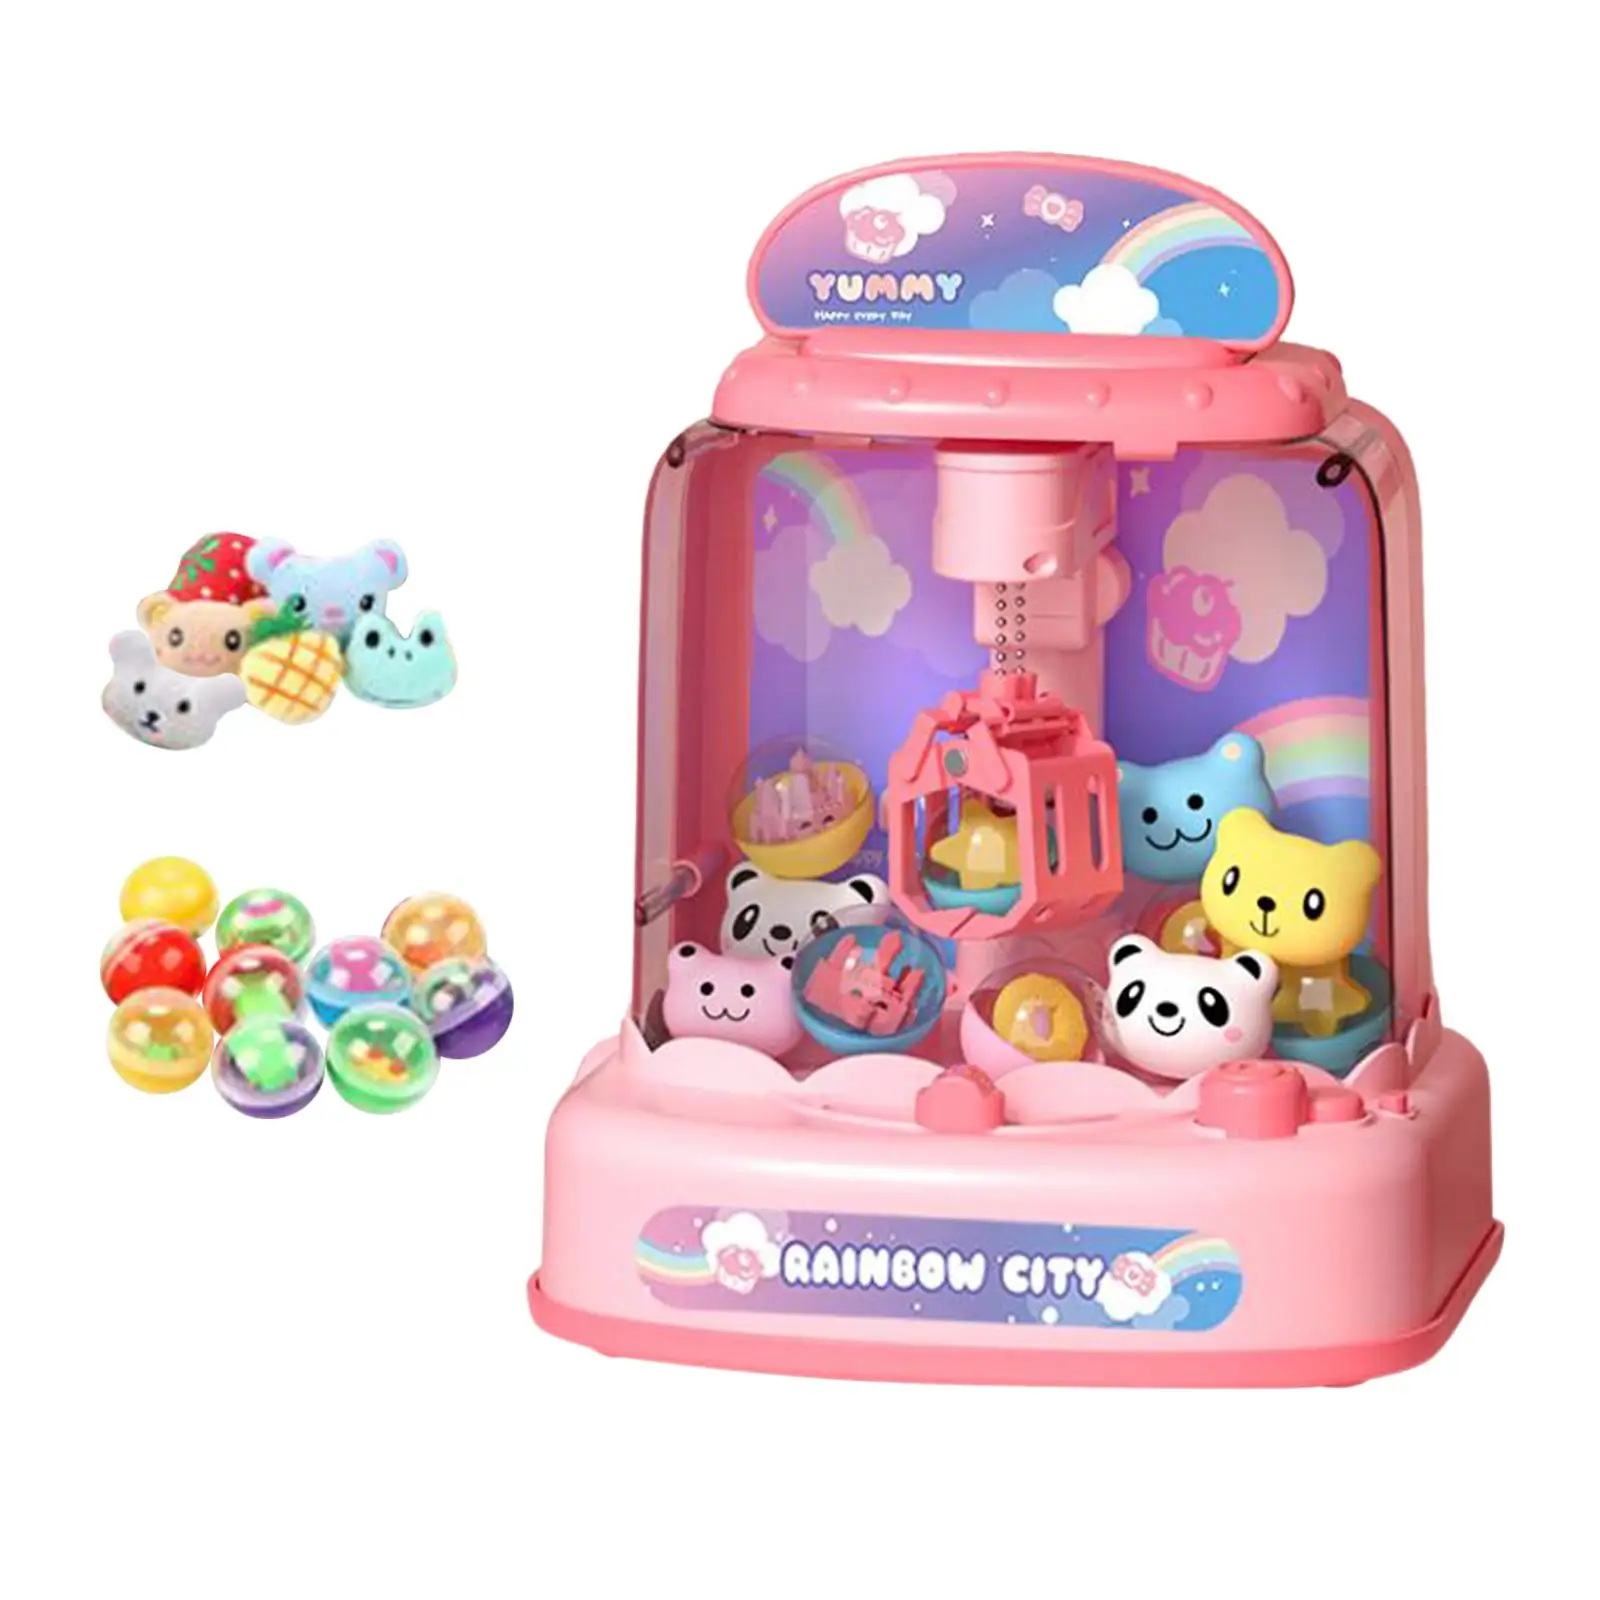 Kids Claw Machine Children Interactive Toys Small Claw Game Mini Vending Machines for Kids 6 7 8 9 Year Old Girls Children Gifts